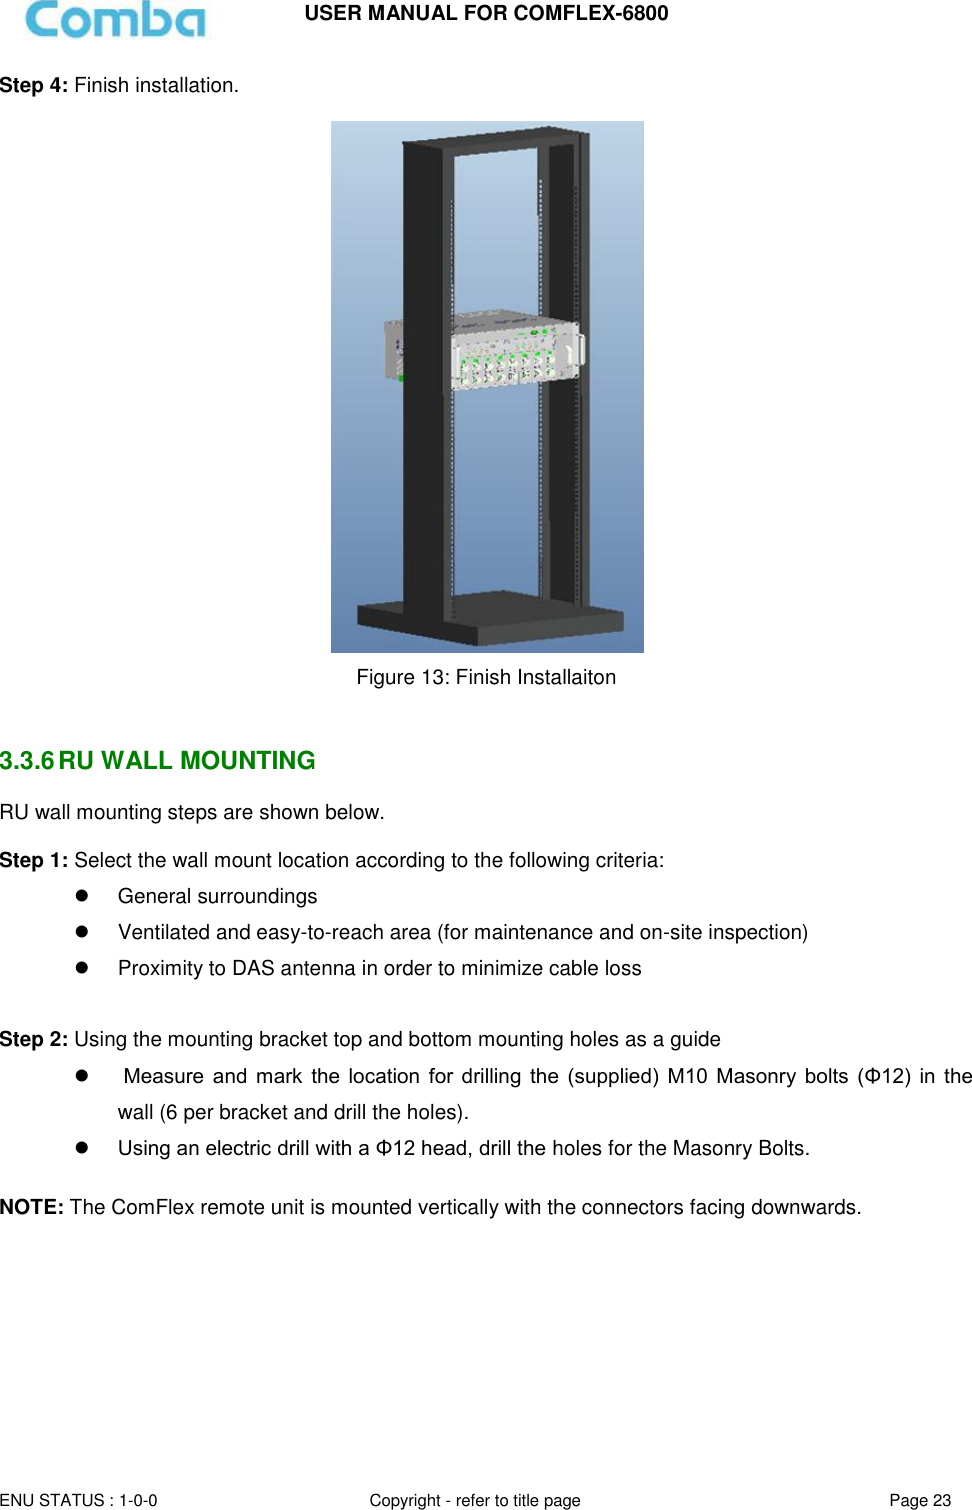 USER MANUAL FOR COMFLEX-6800  ENU STATUS : 1-0-0 Copyright - refer to title page Page 23  Step 4: Finish installation.   Figure 13: Finish Installaiton   3.3.6 RU WALL MOUNTING RU wall mounting steps are shown below.  Step 1: Select the wall mount location according to the following criteria:   General surroundings   Ventilated and easy-to-reach area (for maintenance and on-site inspection)   Proximity to DAS antenna in order to minimize cable loss  Step 2: Using the mounting bracket top and bottom mounting holes as a guide     Measure  and  mark the  location for  drilling  the  (supplied)  M10  Masonry  bolts  (Φ12)  in  the wall (6 per bracket and drill the holes).  Using an electric drill with a Φ12 head, drill the holes for the Masonry Bolts.  NOTE: The ComFlex remote unit is mounted vertically with the connectors facing downwards.      